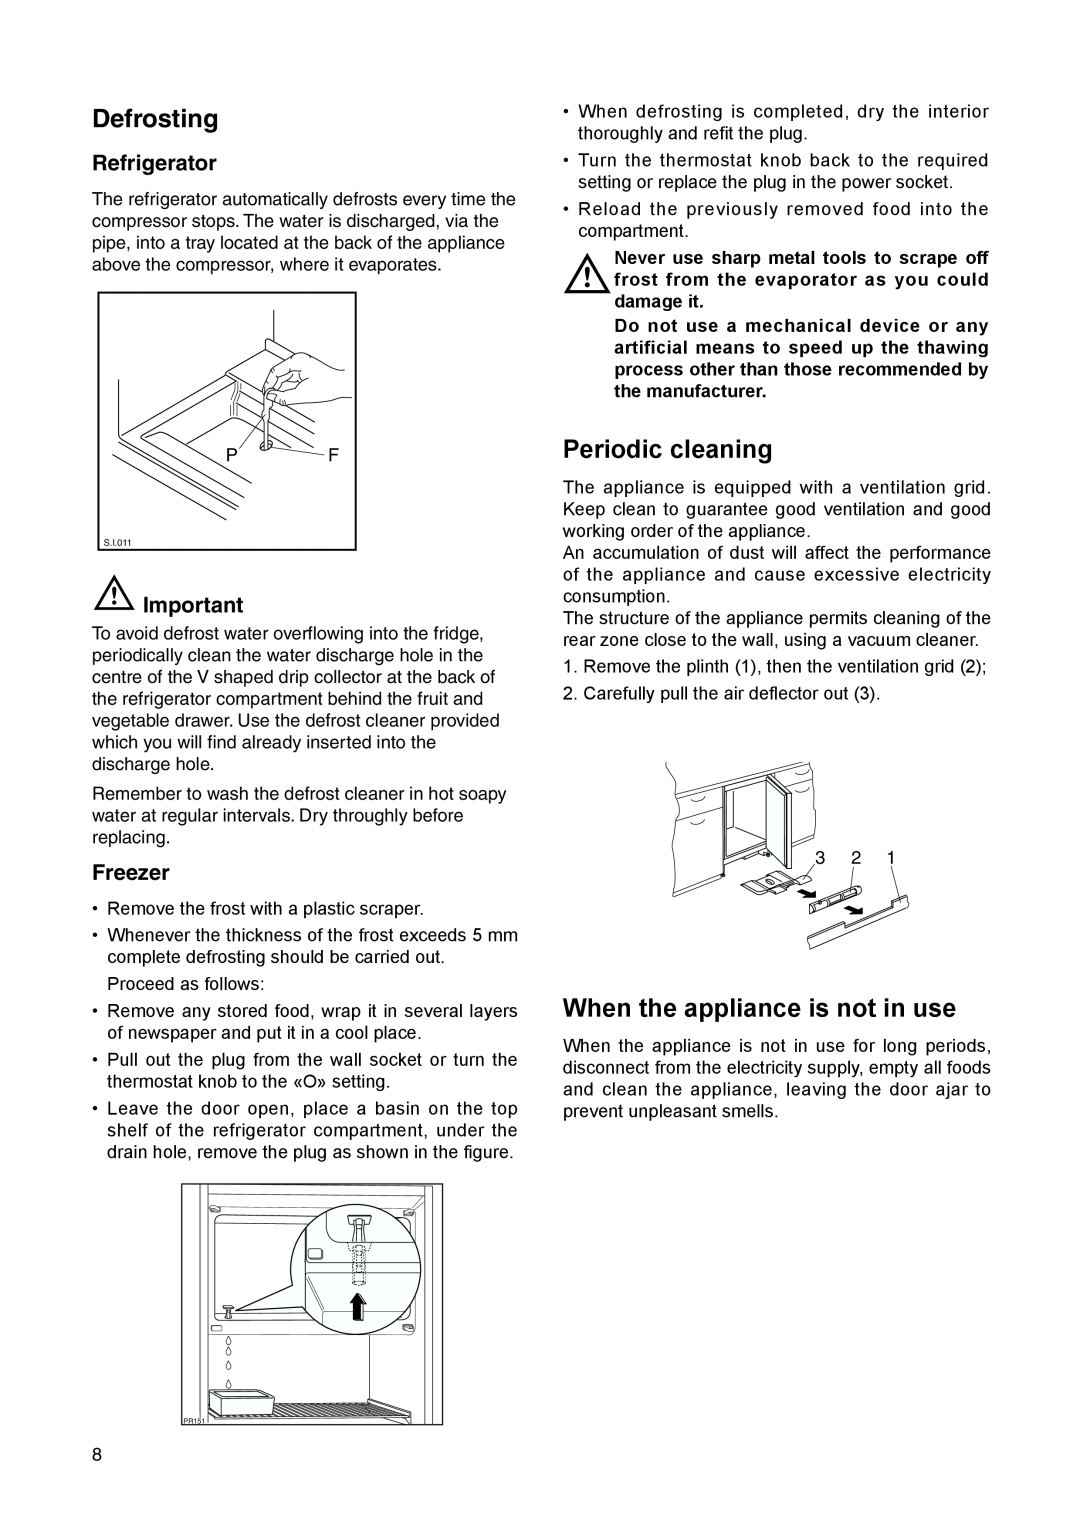 Electrolux ERU 13400 manual Defrosting, Periodic cleaning, When the appliance is not in use 